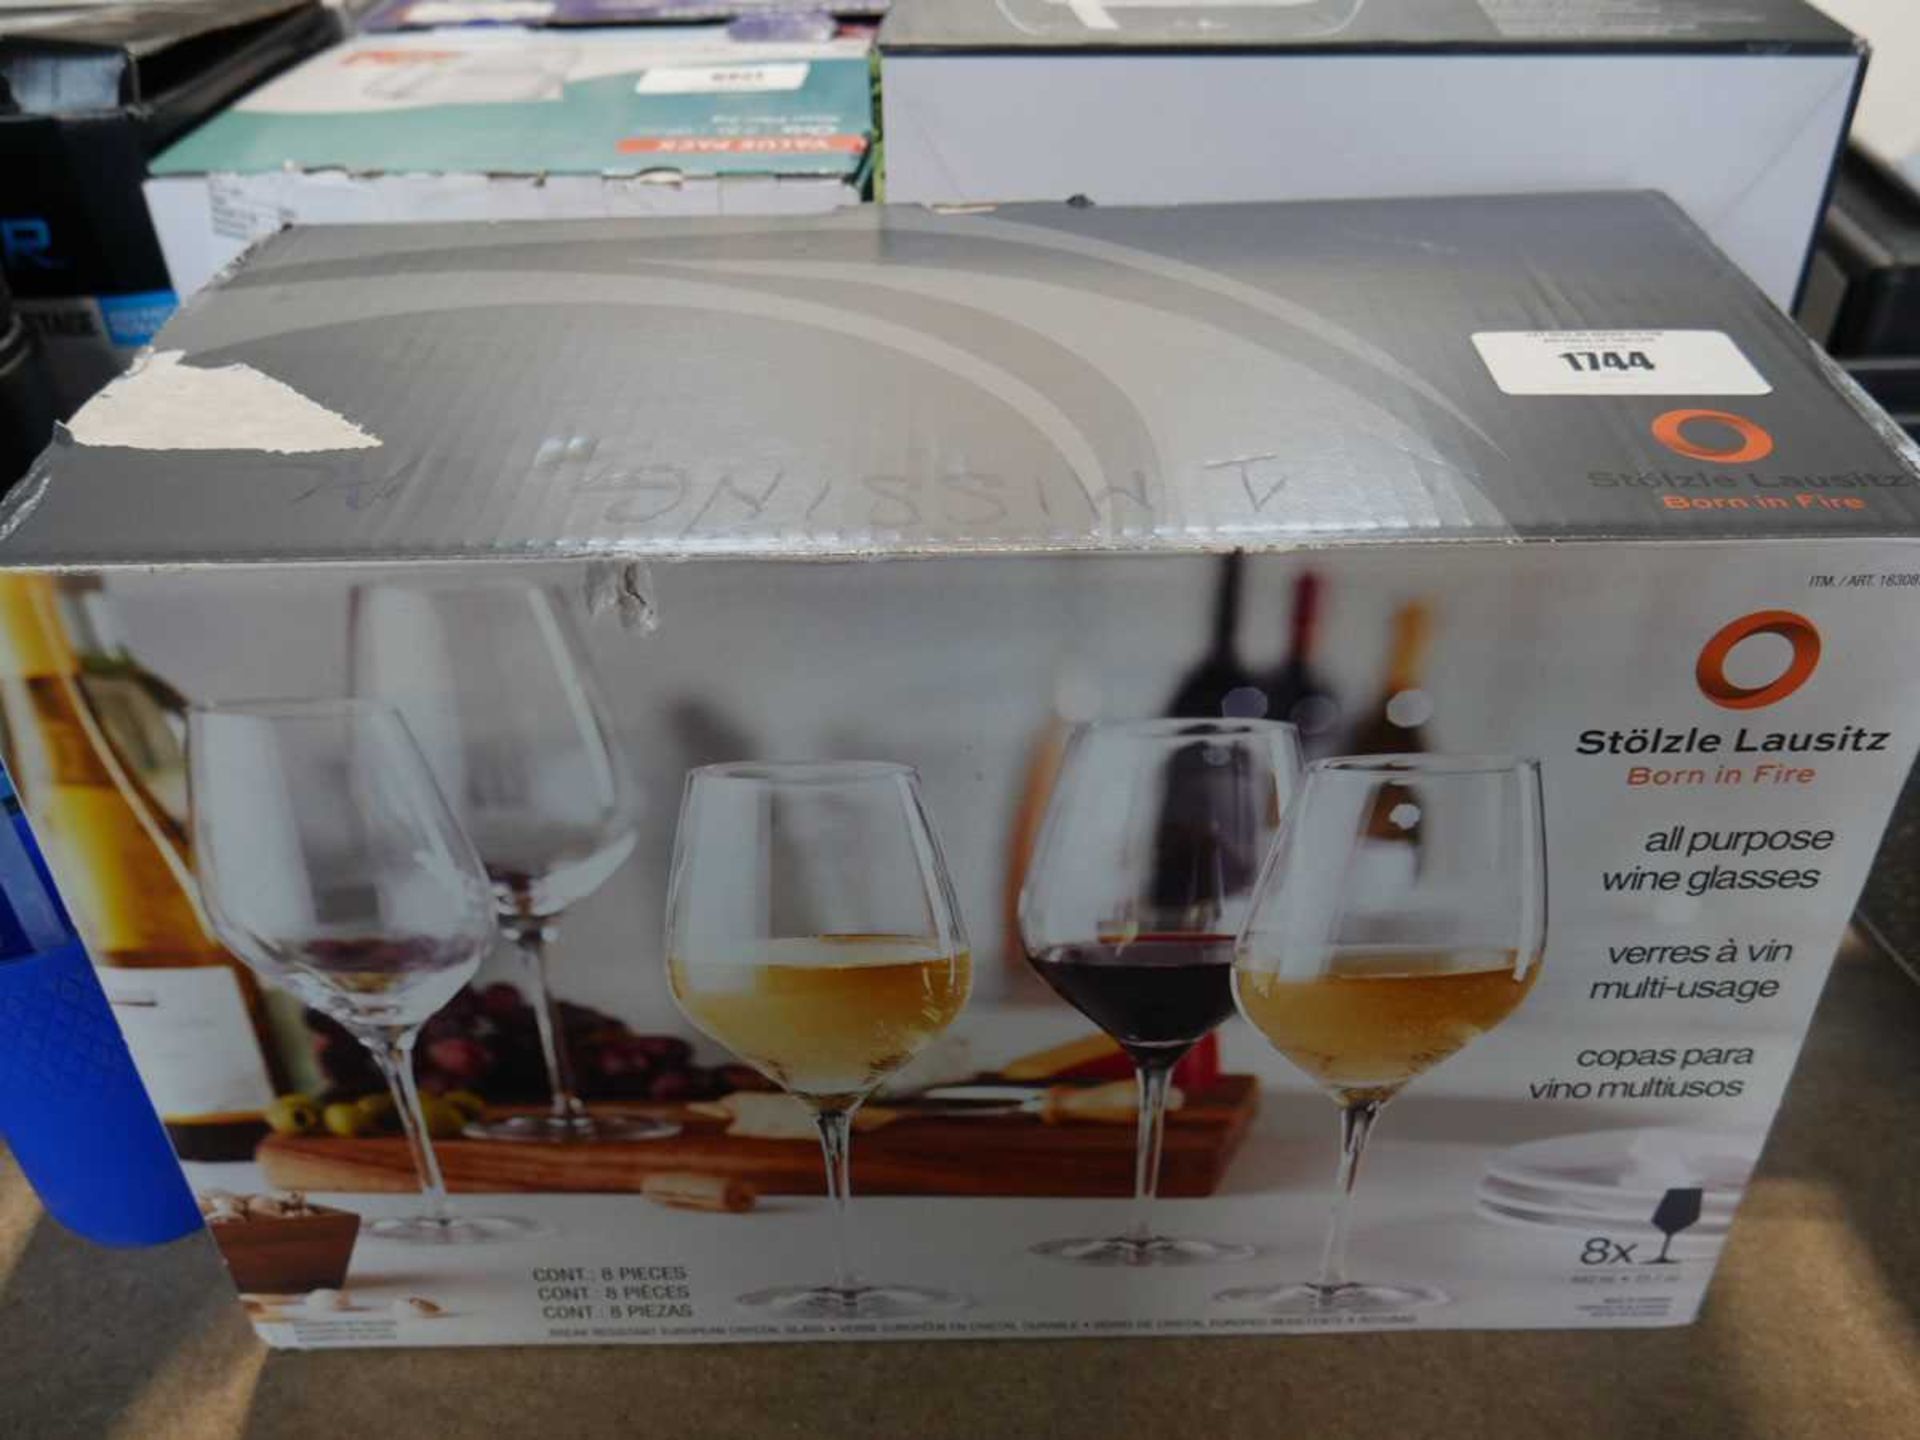 +VAT Boxed Stölzle Lausitz all purpose wine glasses (1 missing) with KitchenAid frying pan and